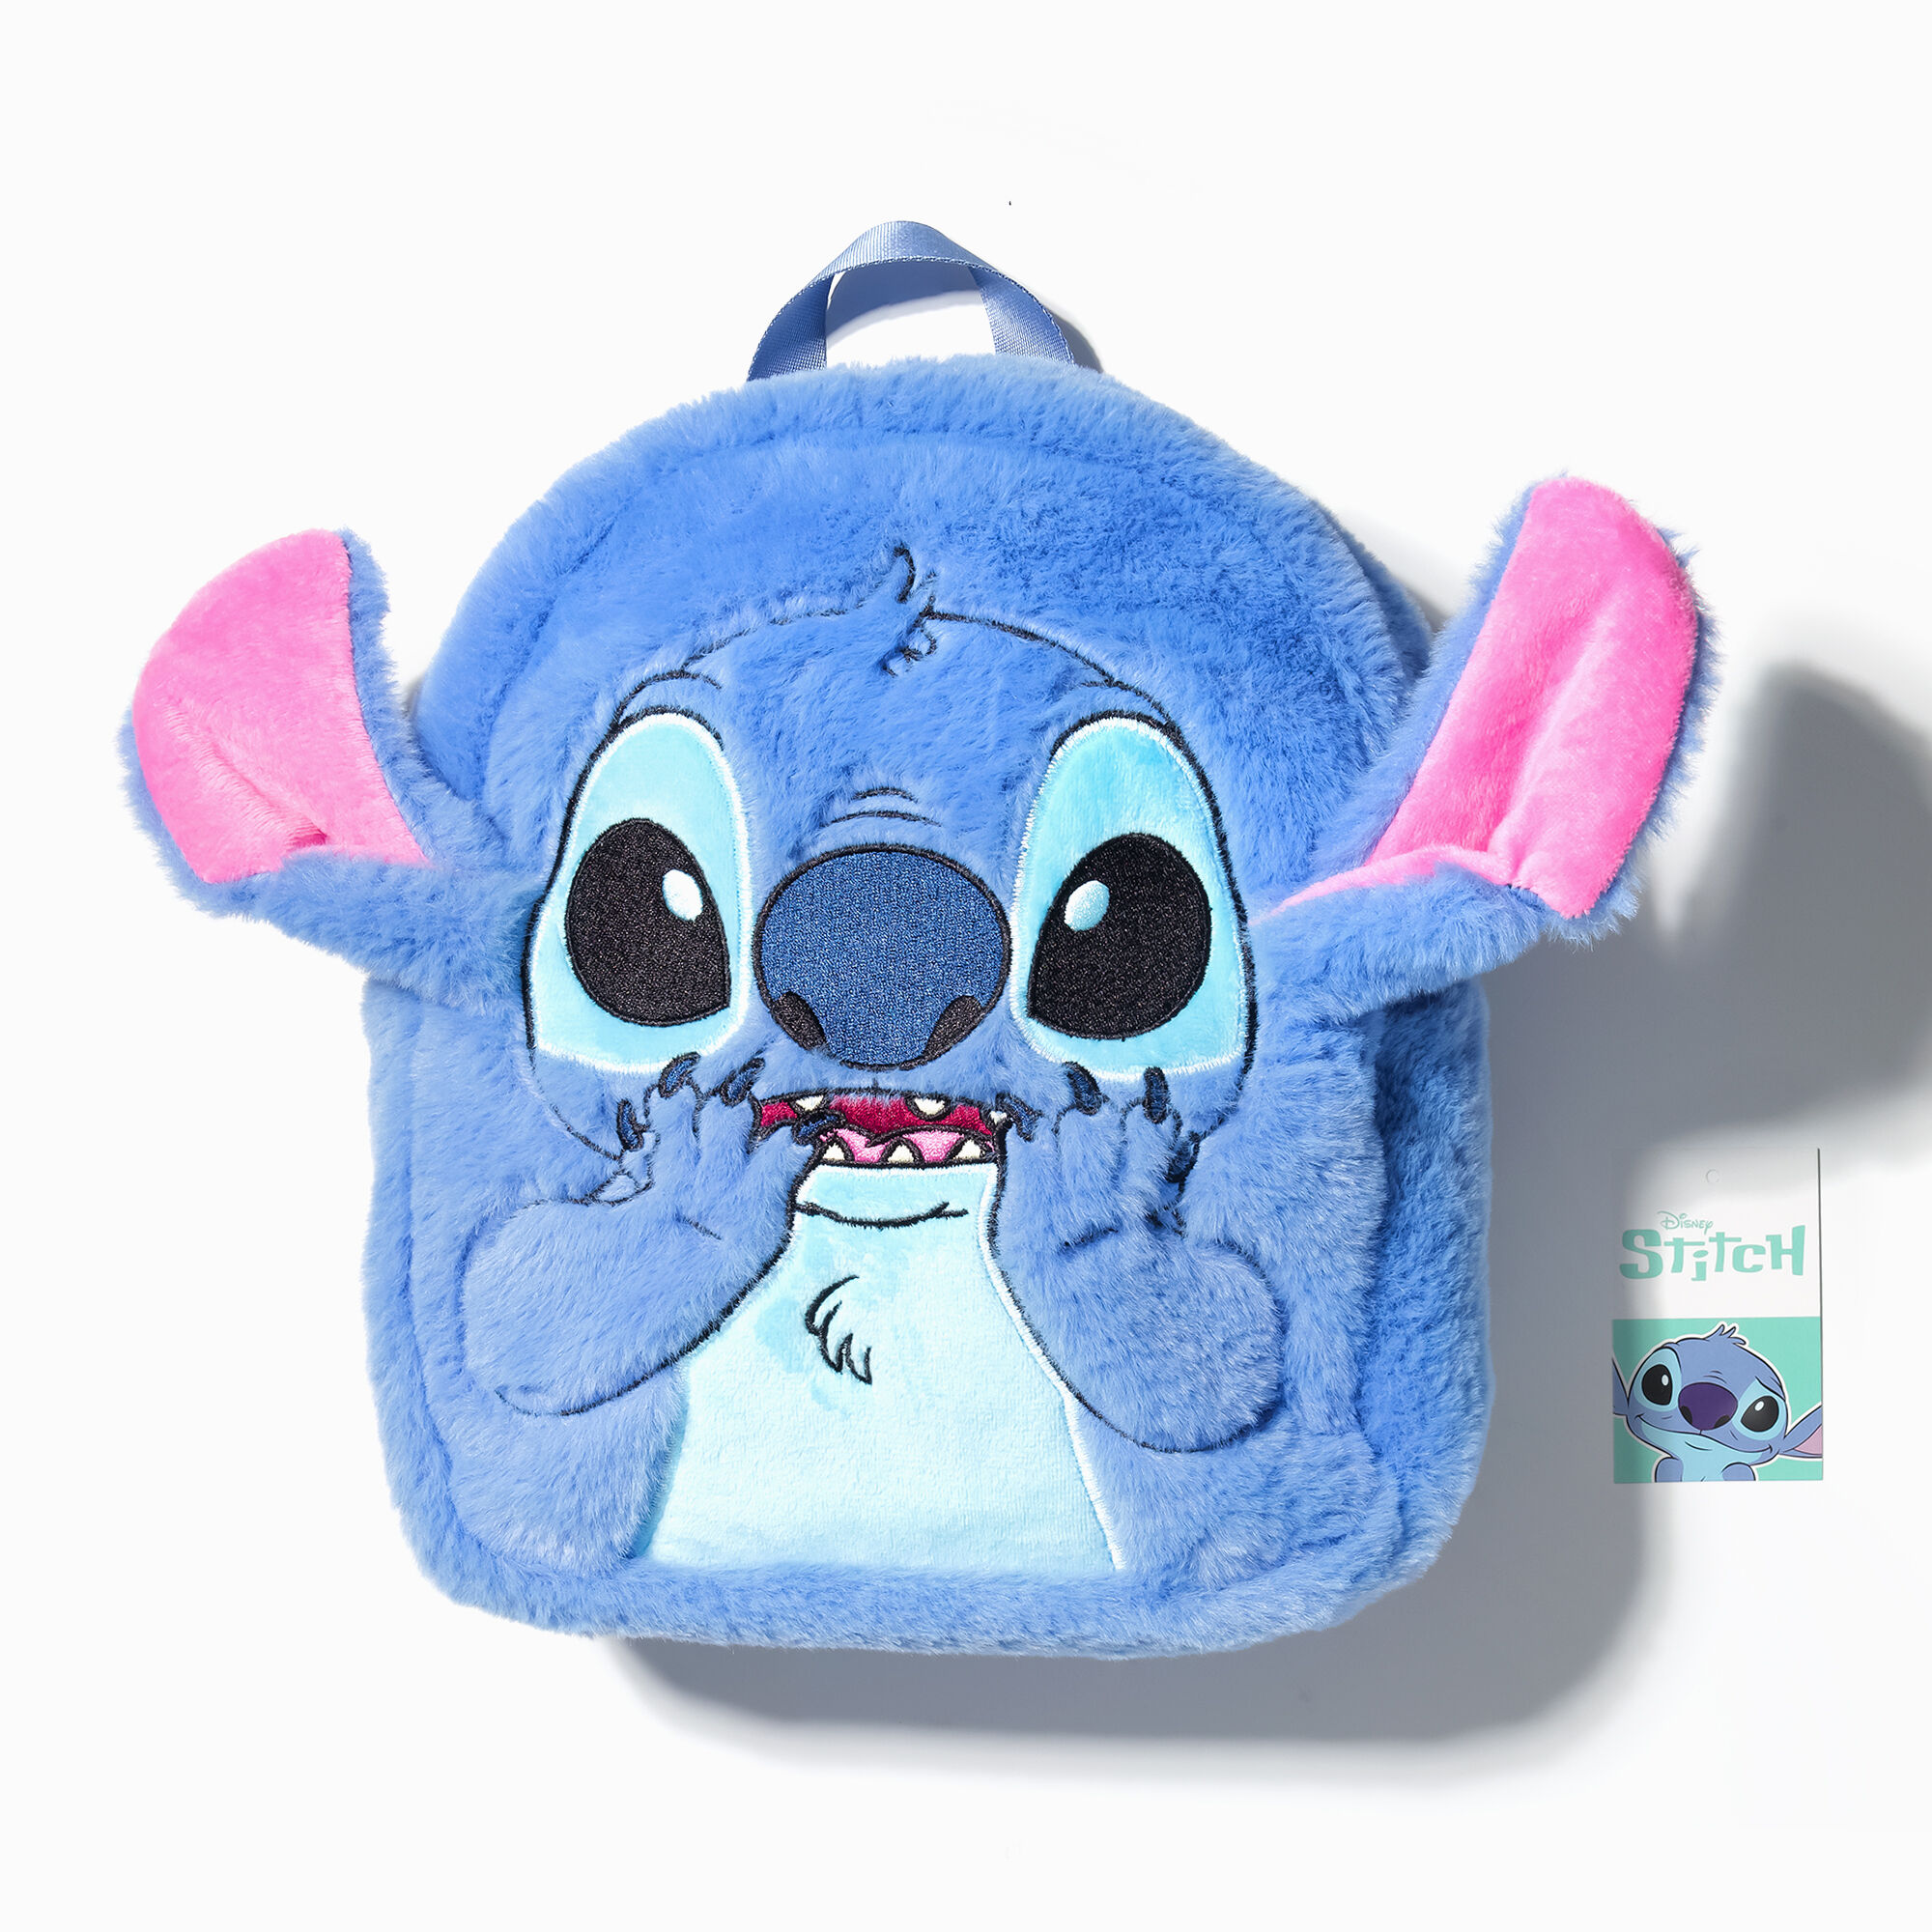 View Claires Disney Stitch Soft Backpack Pink information